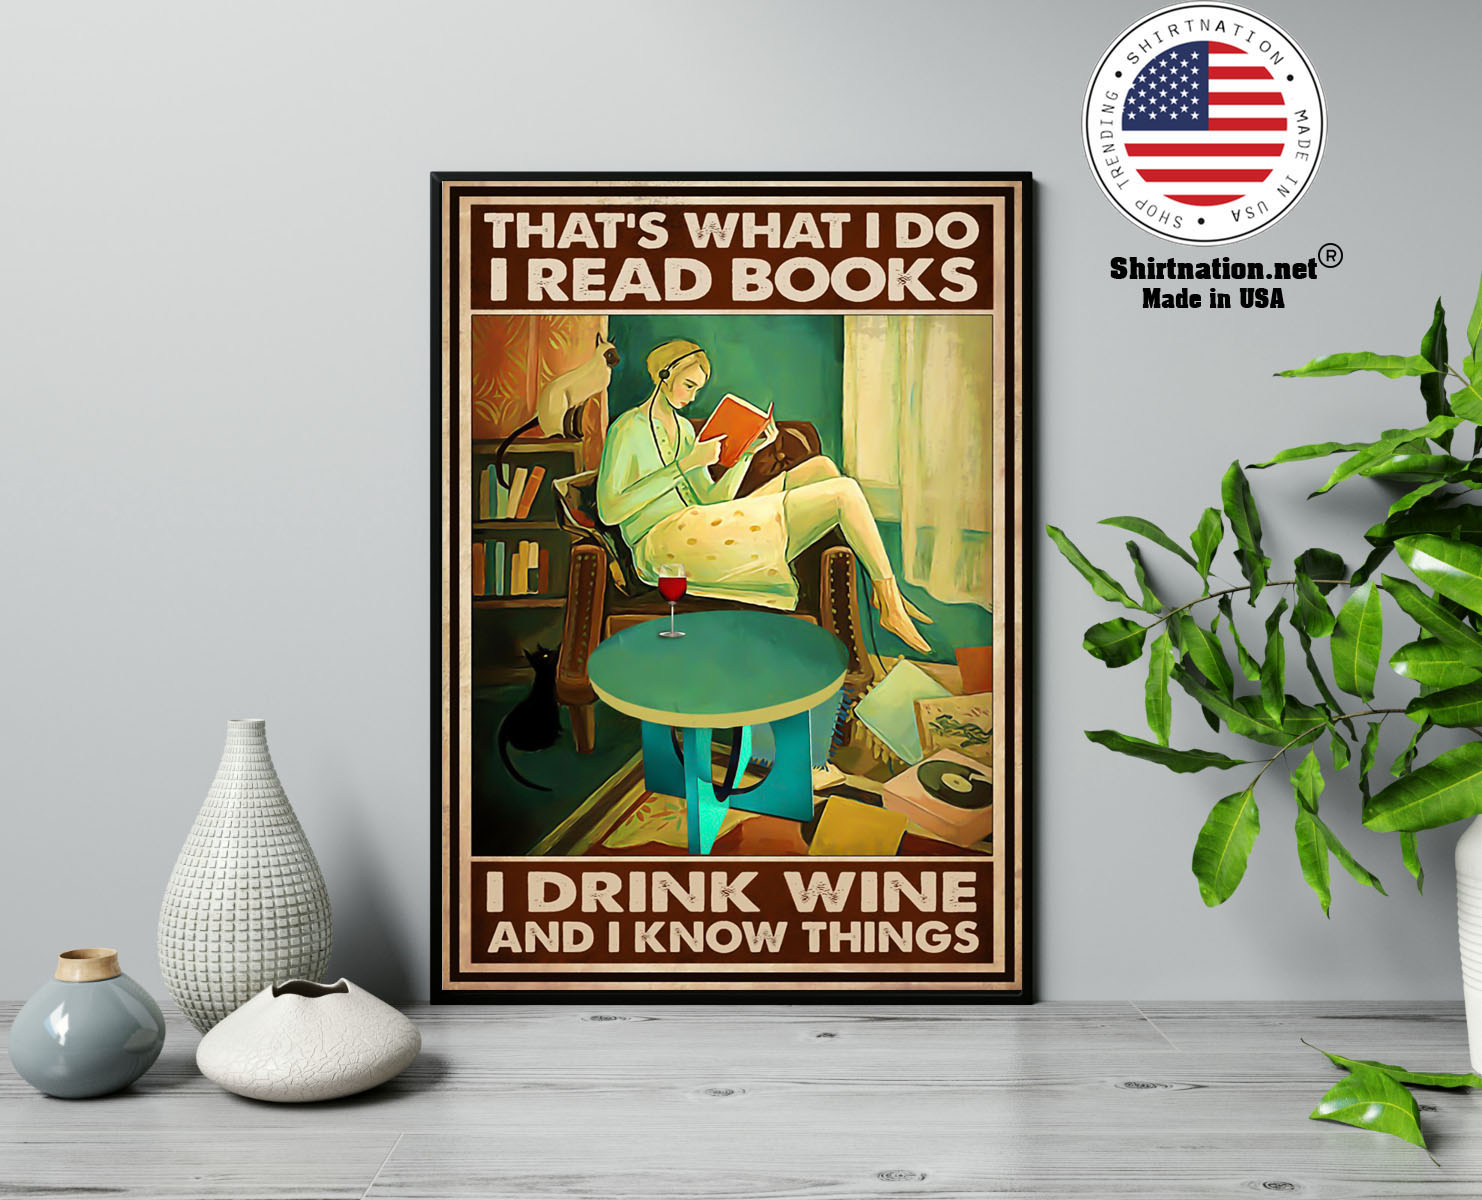 Thats what I do I read books I drink wine and I know things poster 13